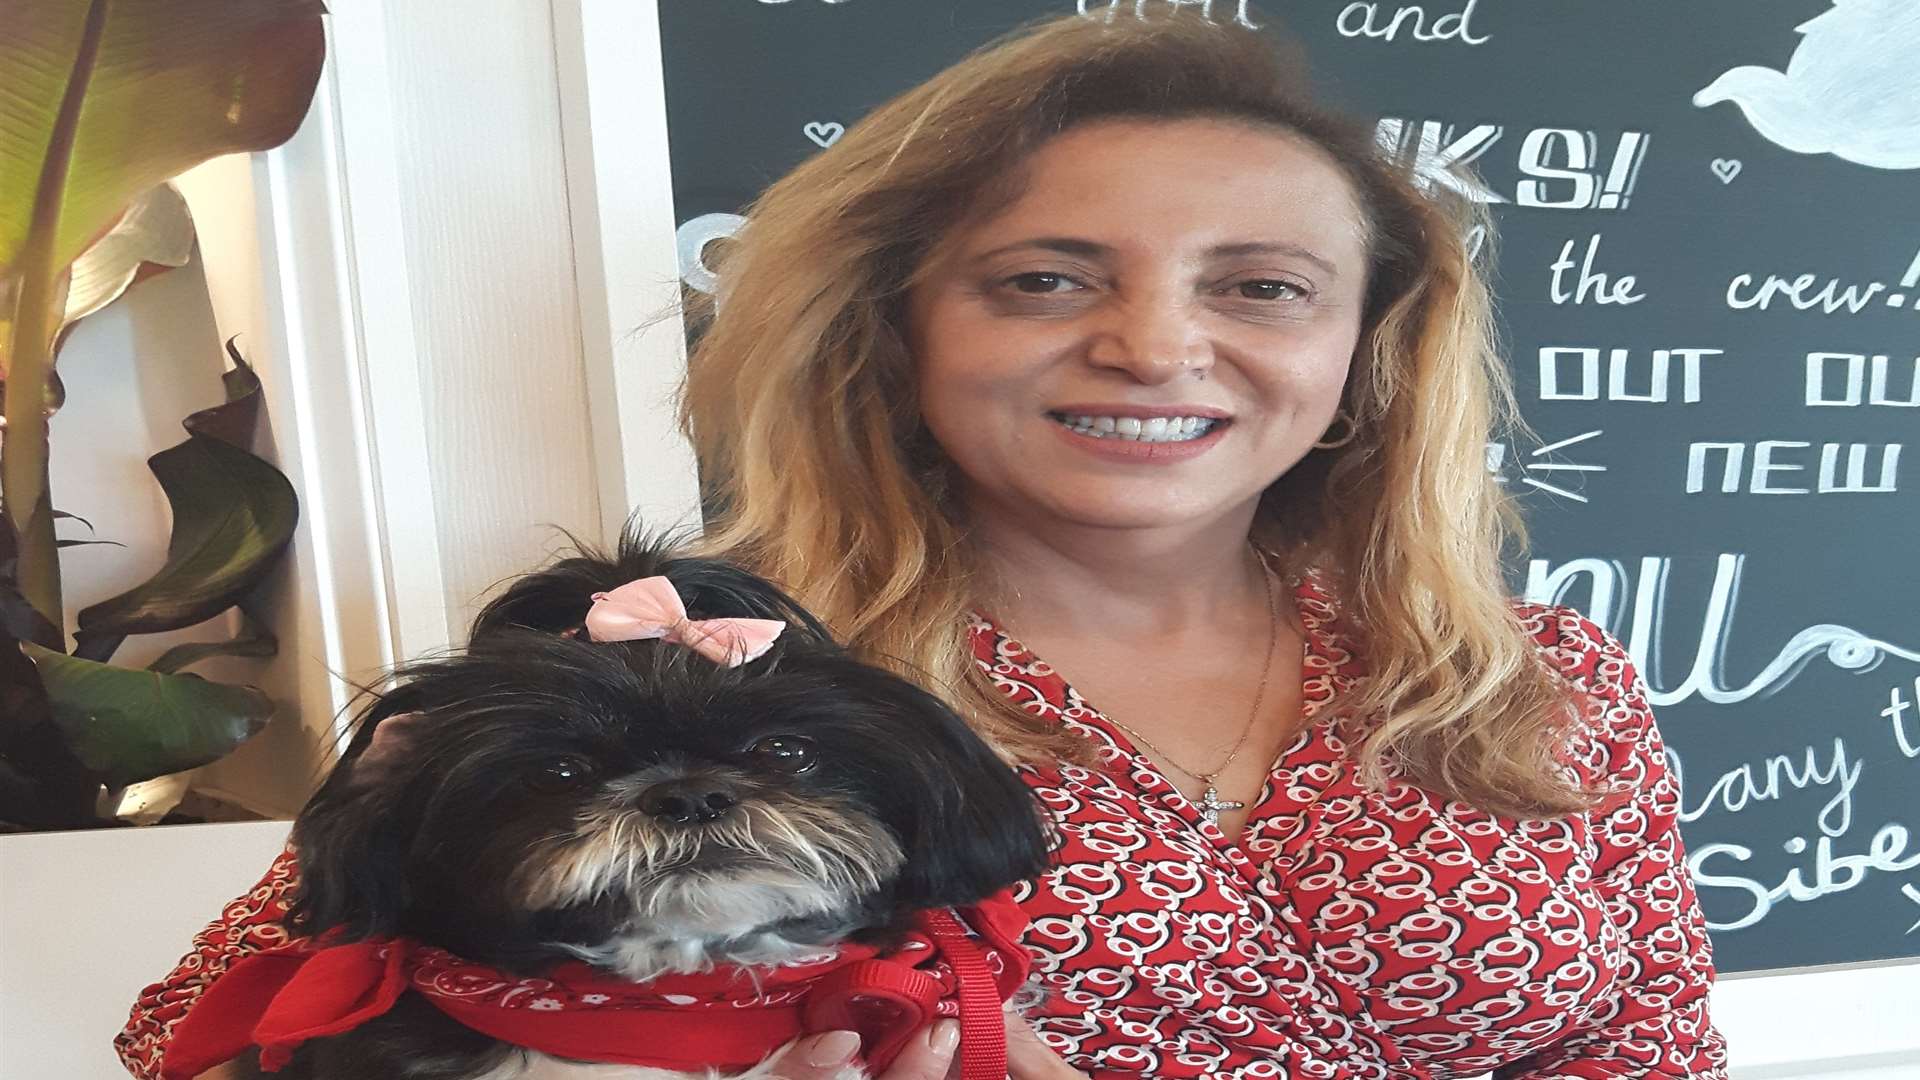 Owner of Wellingtons Sibel Tatton with her dog Jza Jza